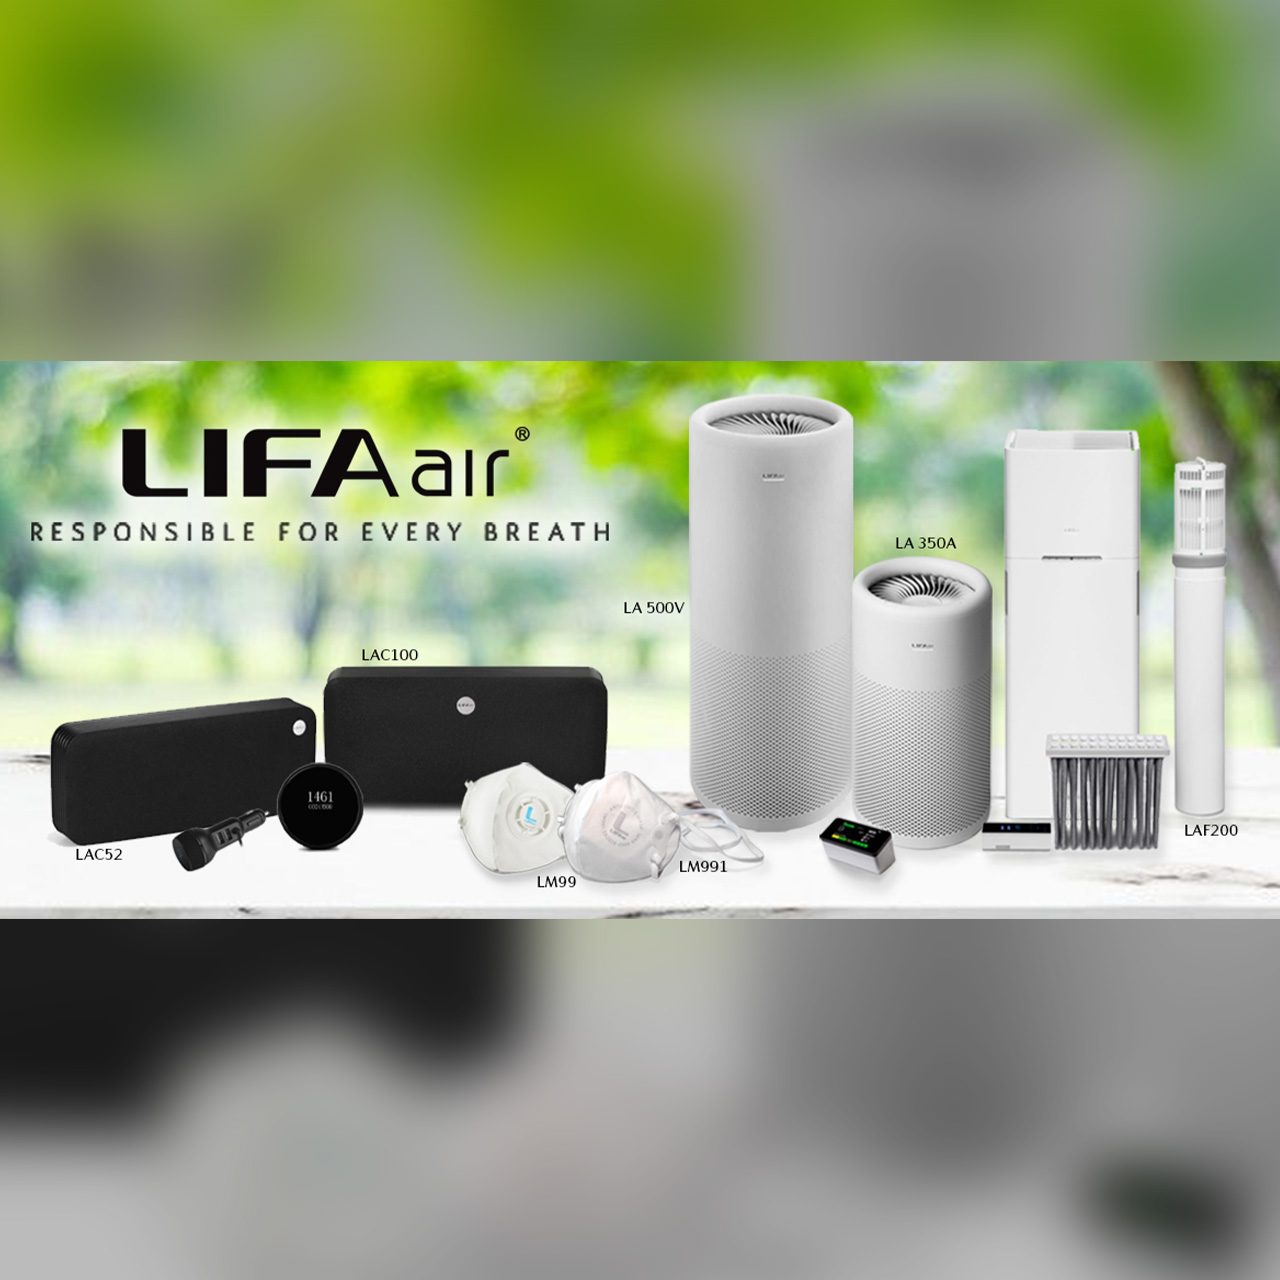 LIFAair brings air purification breakthrough to the Philippines